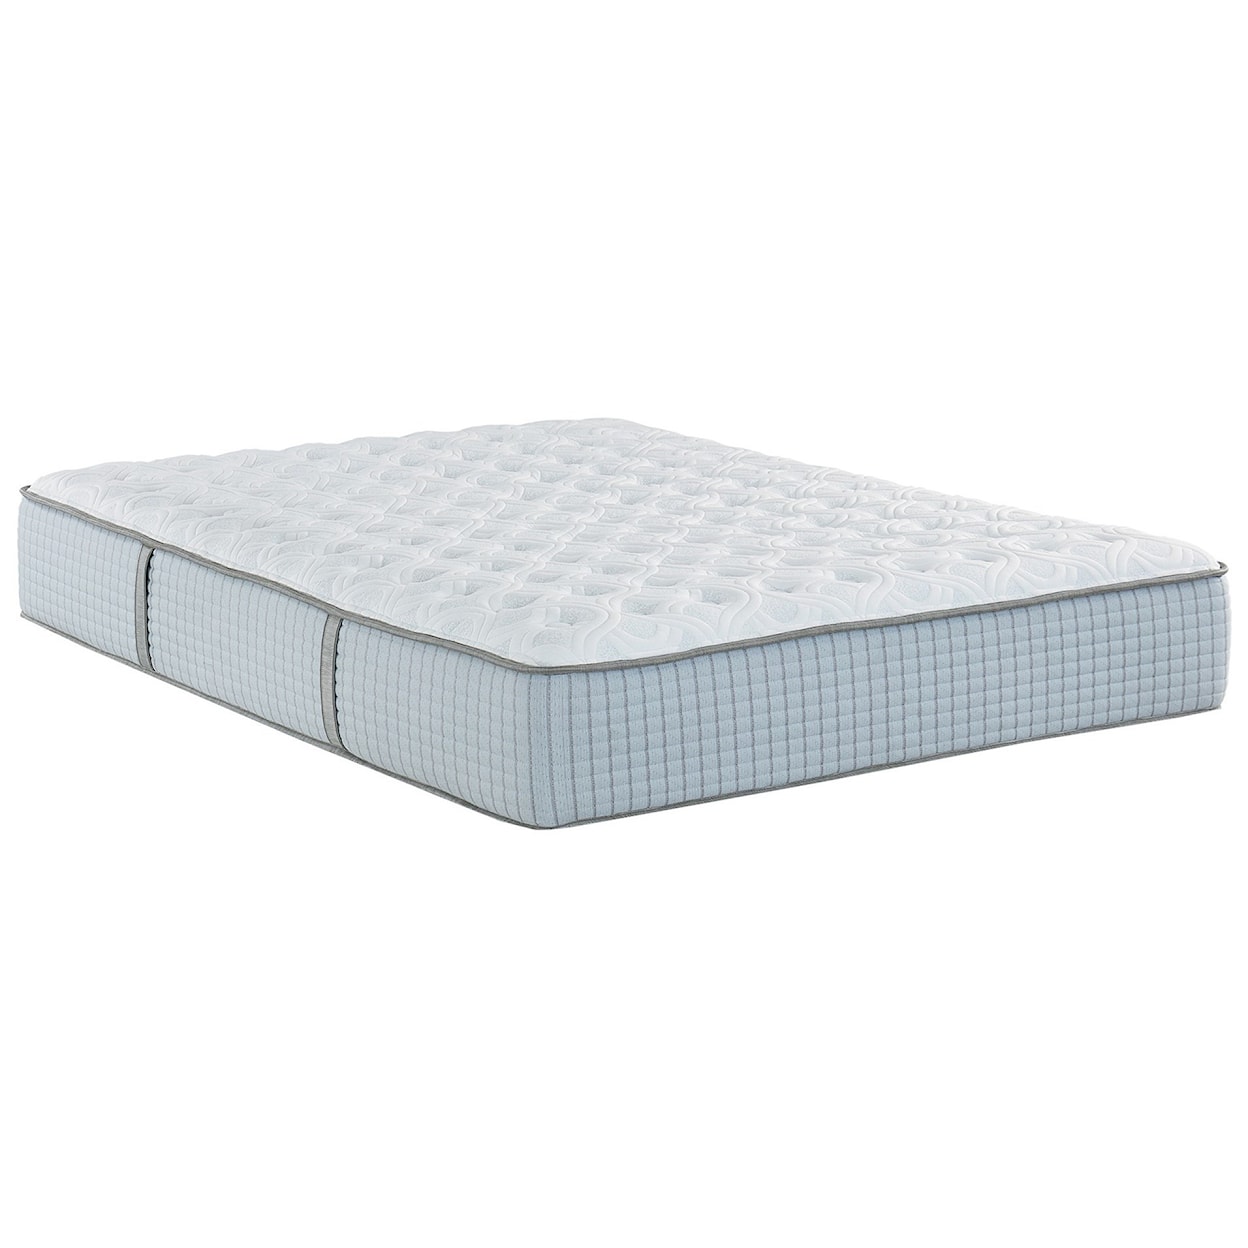 Restonic Clarion IV Luxury Plush and Luxury Firm Full 2-Sided Firm / Plush Mattress